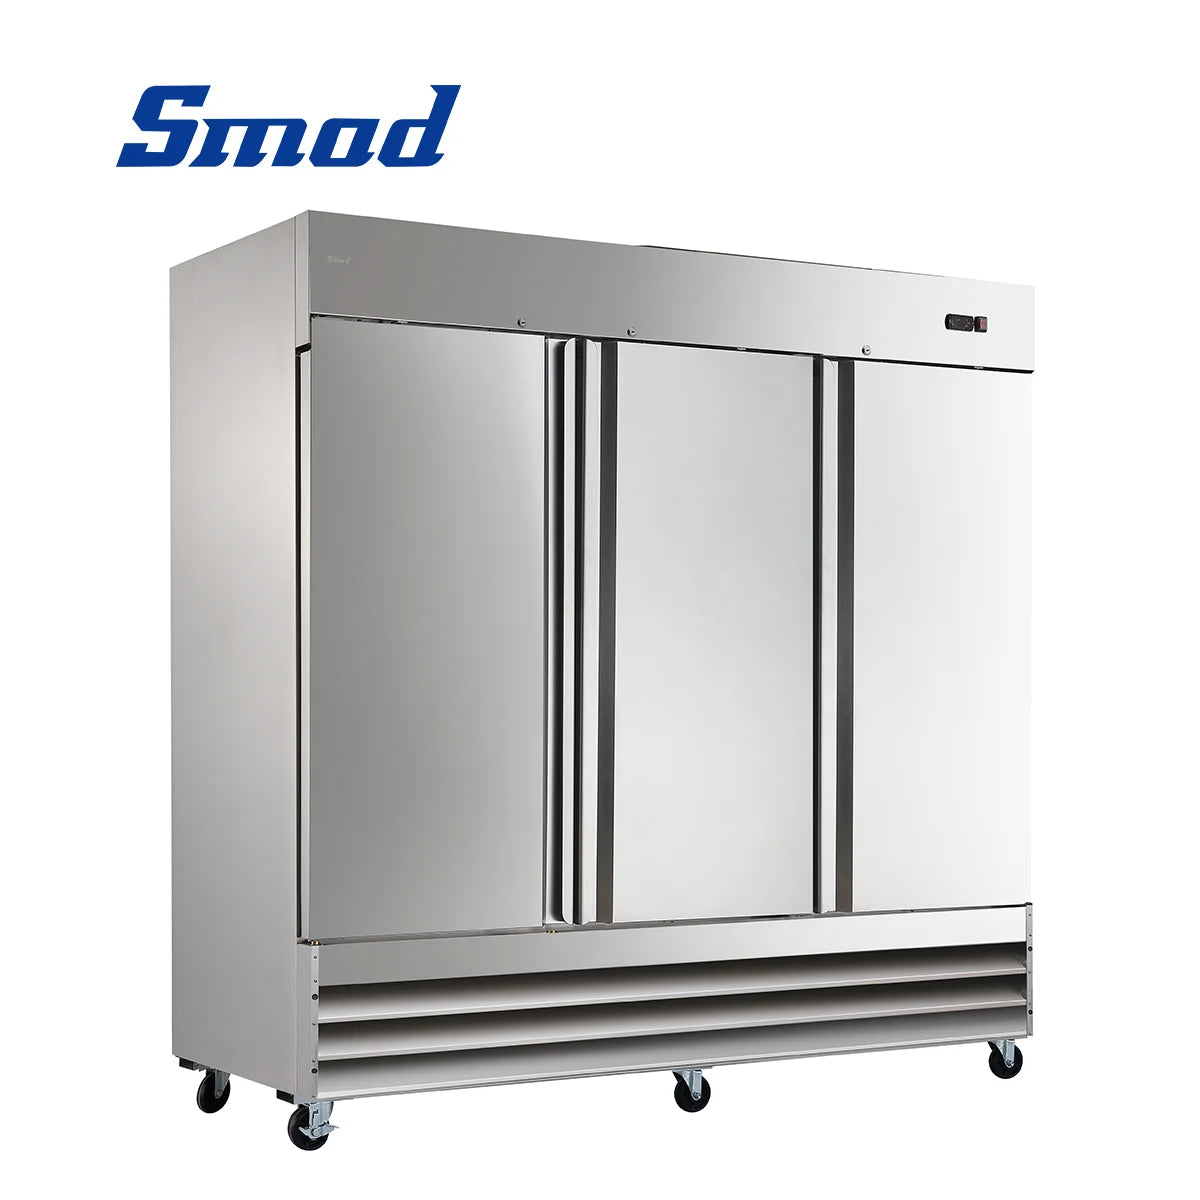 Smad 72 Cu.Ft Commercial Reach-in Refrigerator 83 in.W Frost Free Upright Fridge with Triple Solid Door Fingerprint-Resistant